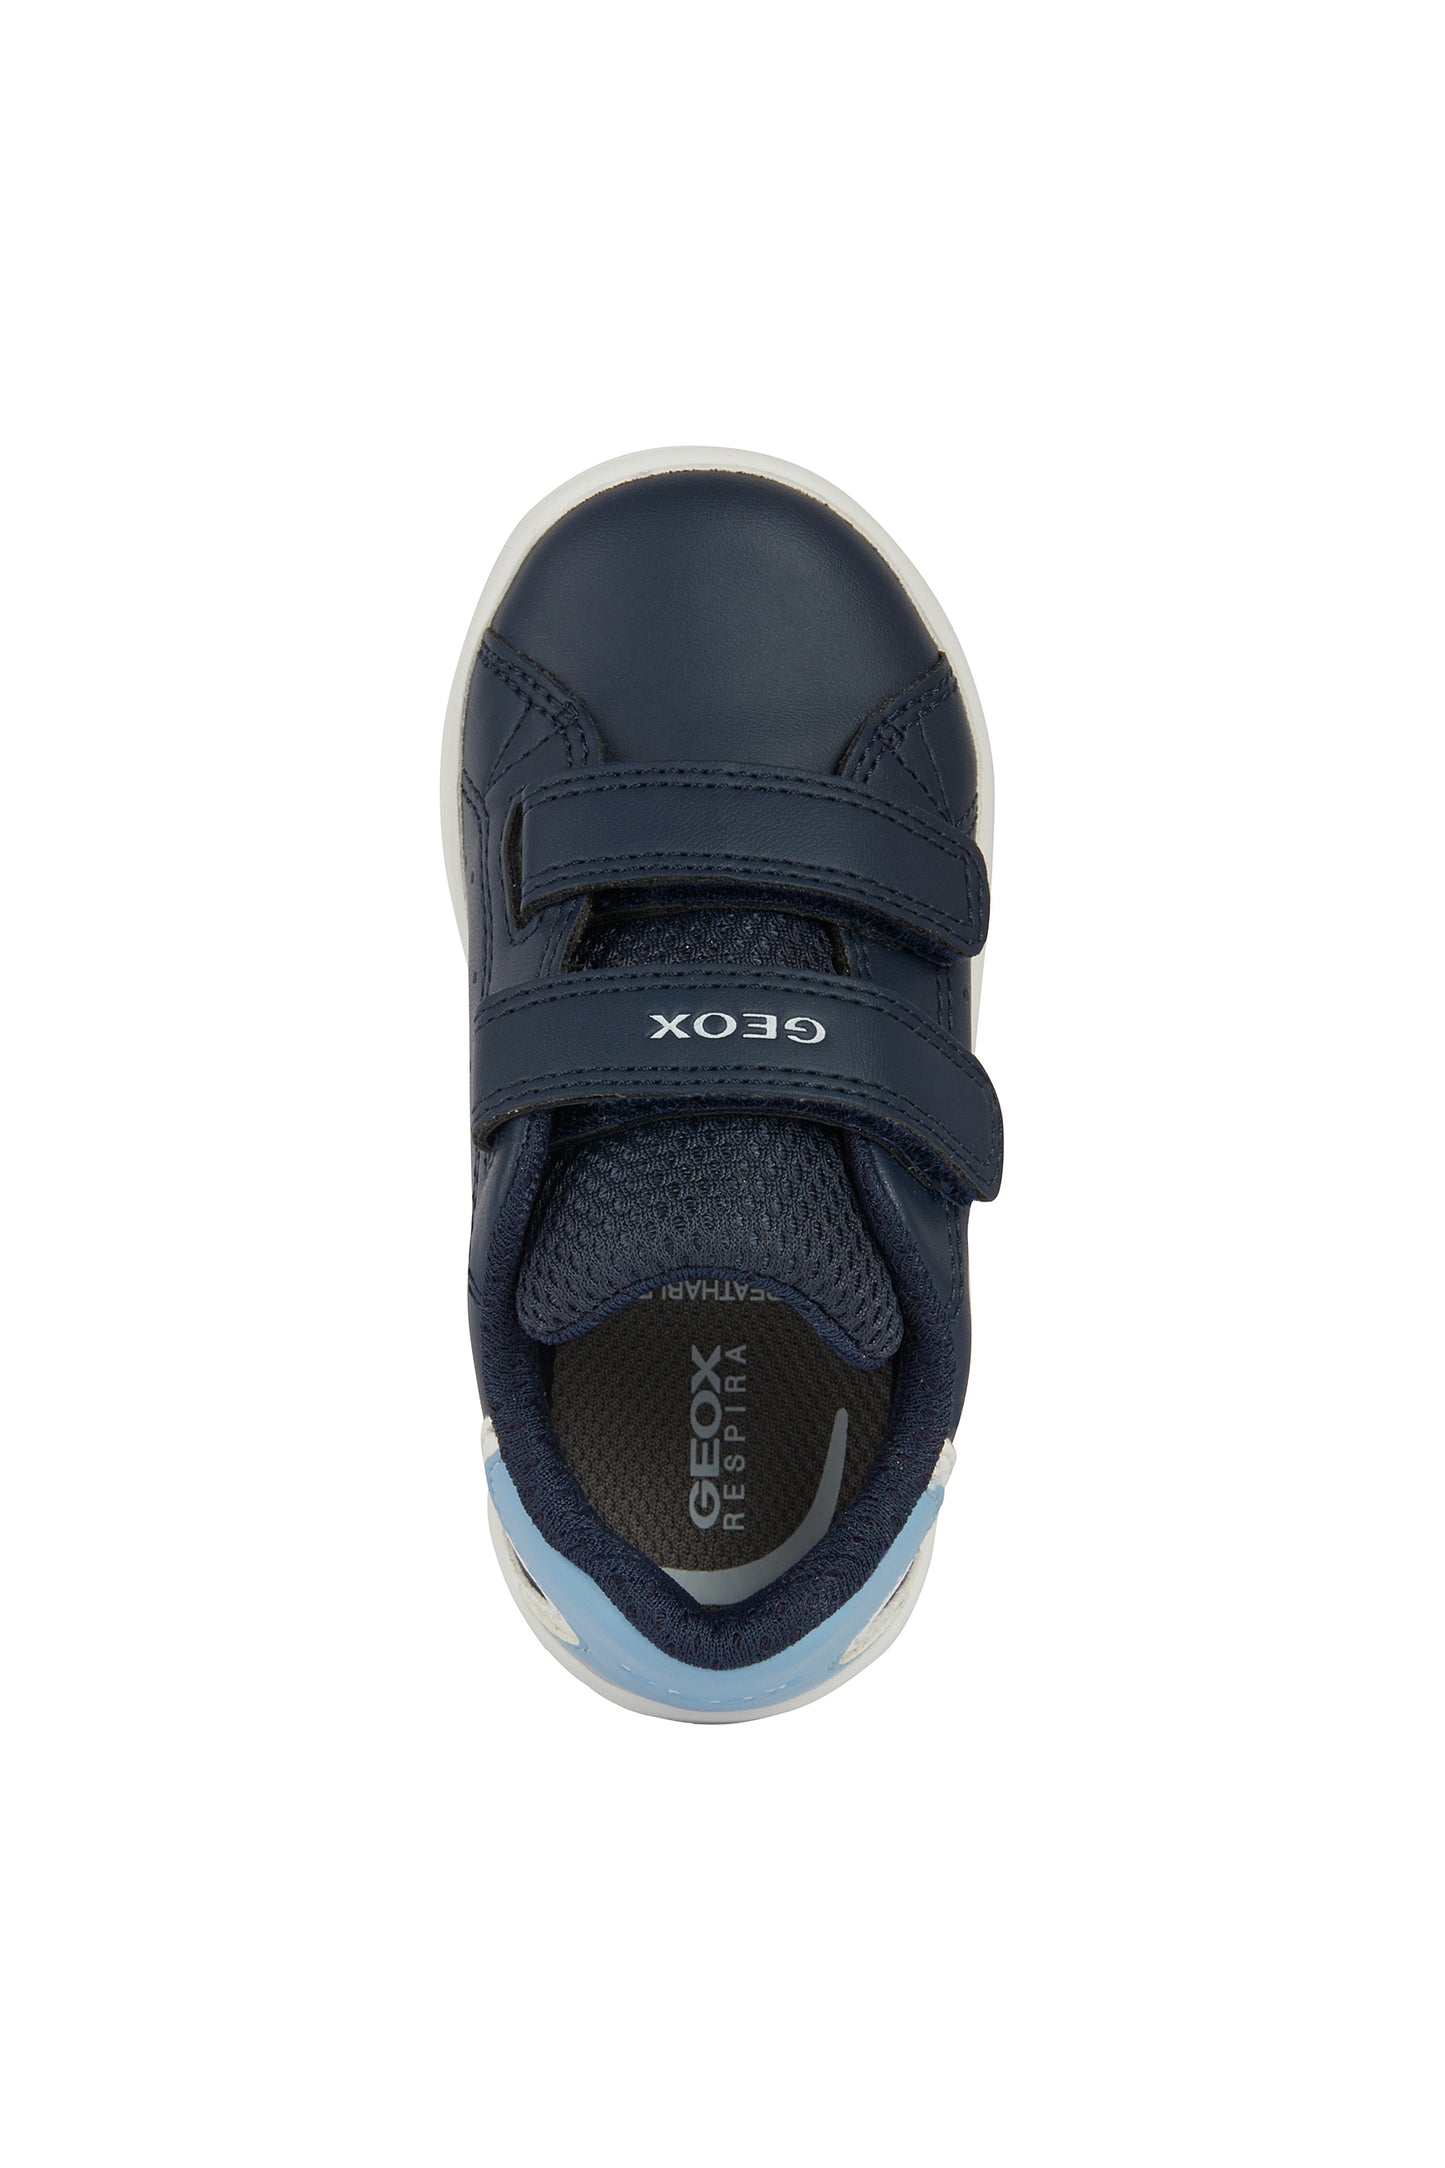 A boys casual shoe by Geox, style B Eclyper, in navy, light blue and white with double velcro fastening. View from above.